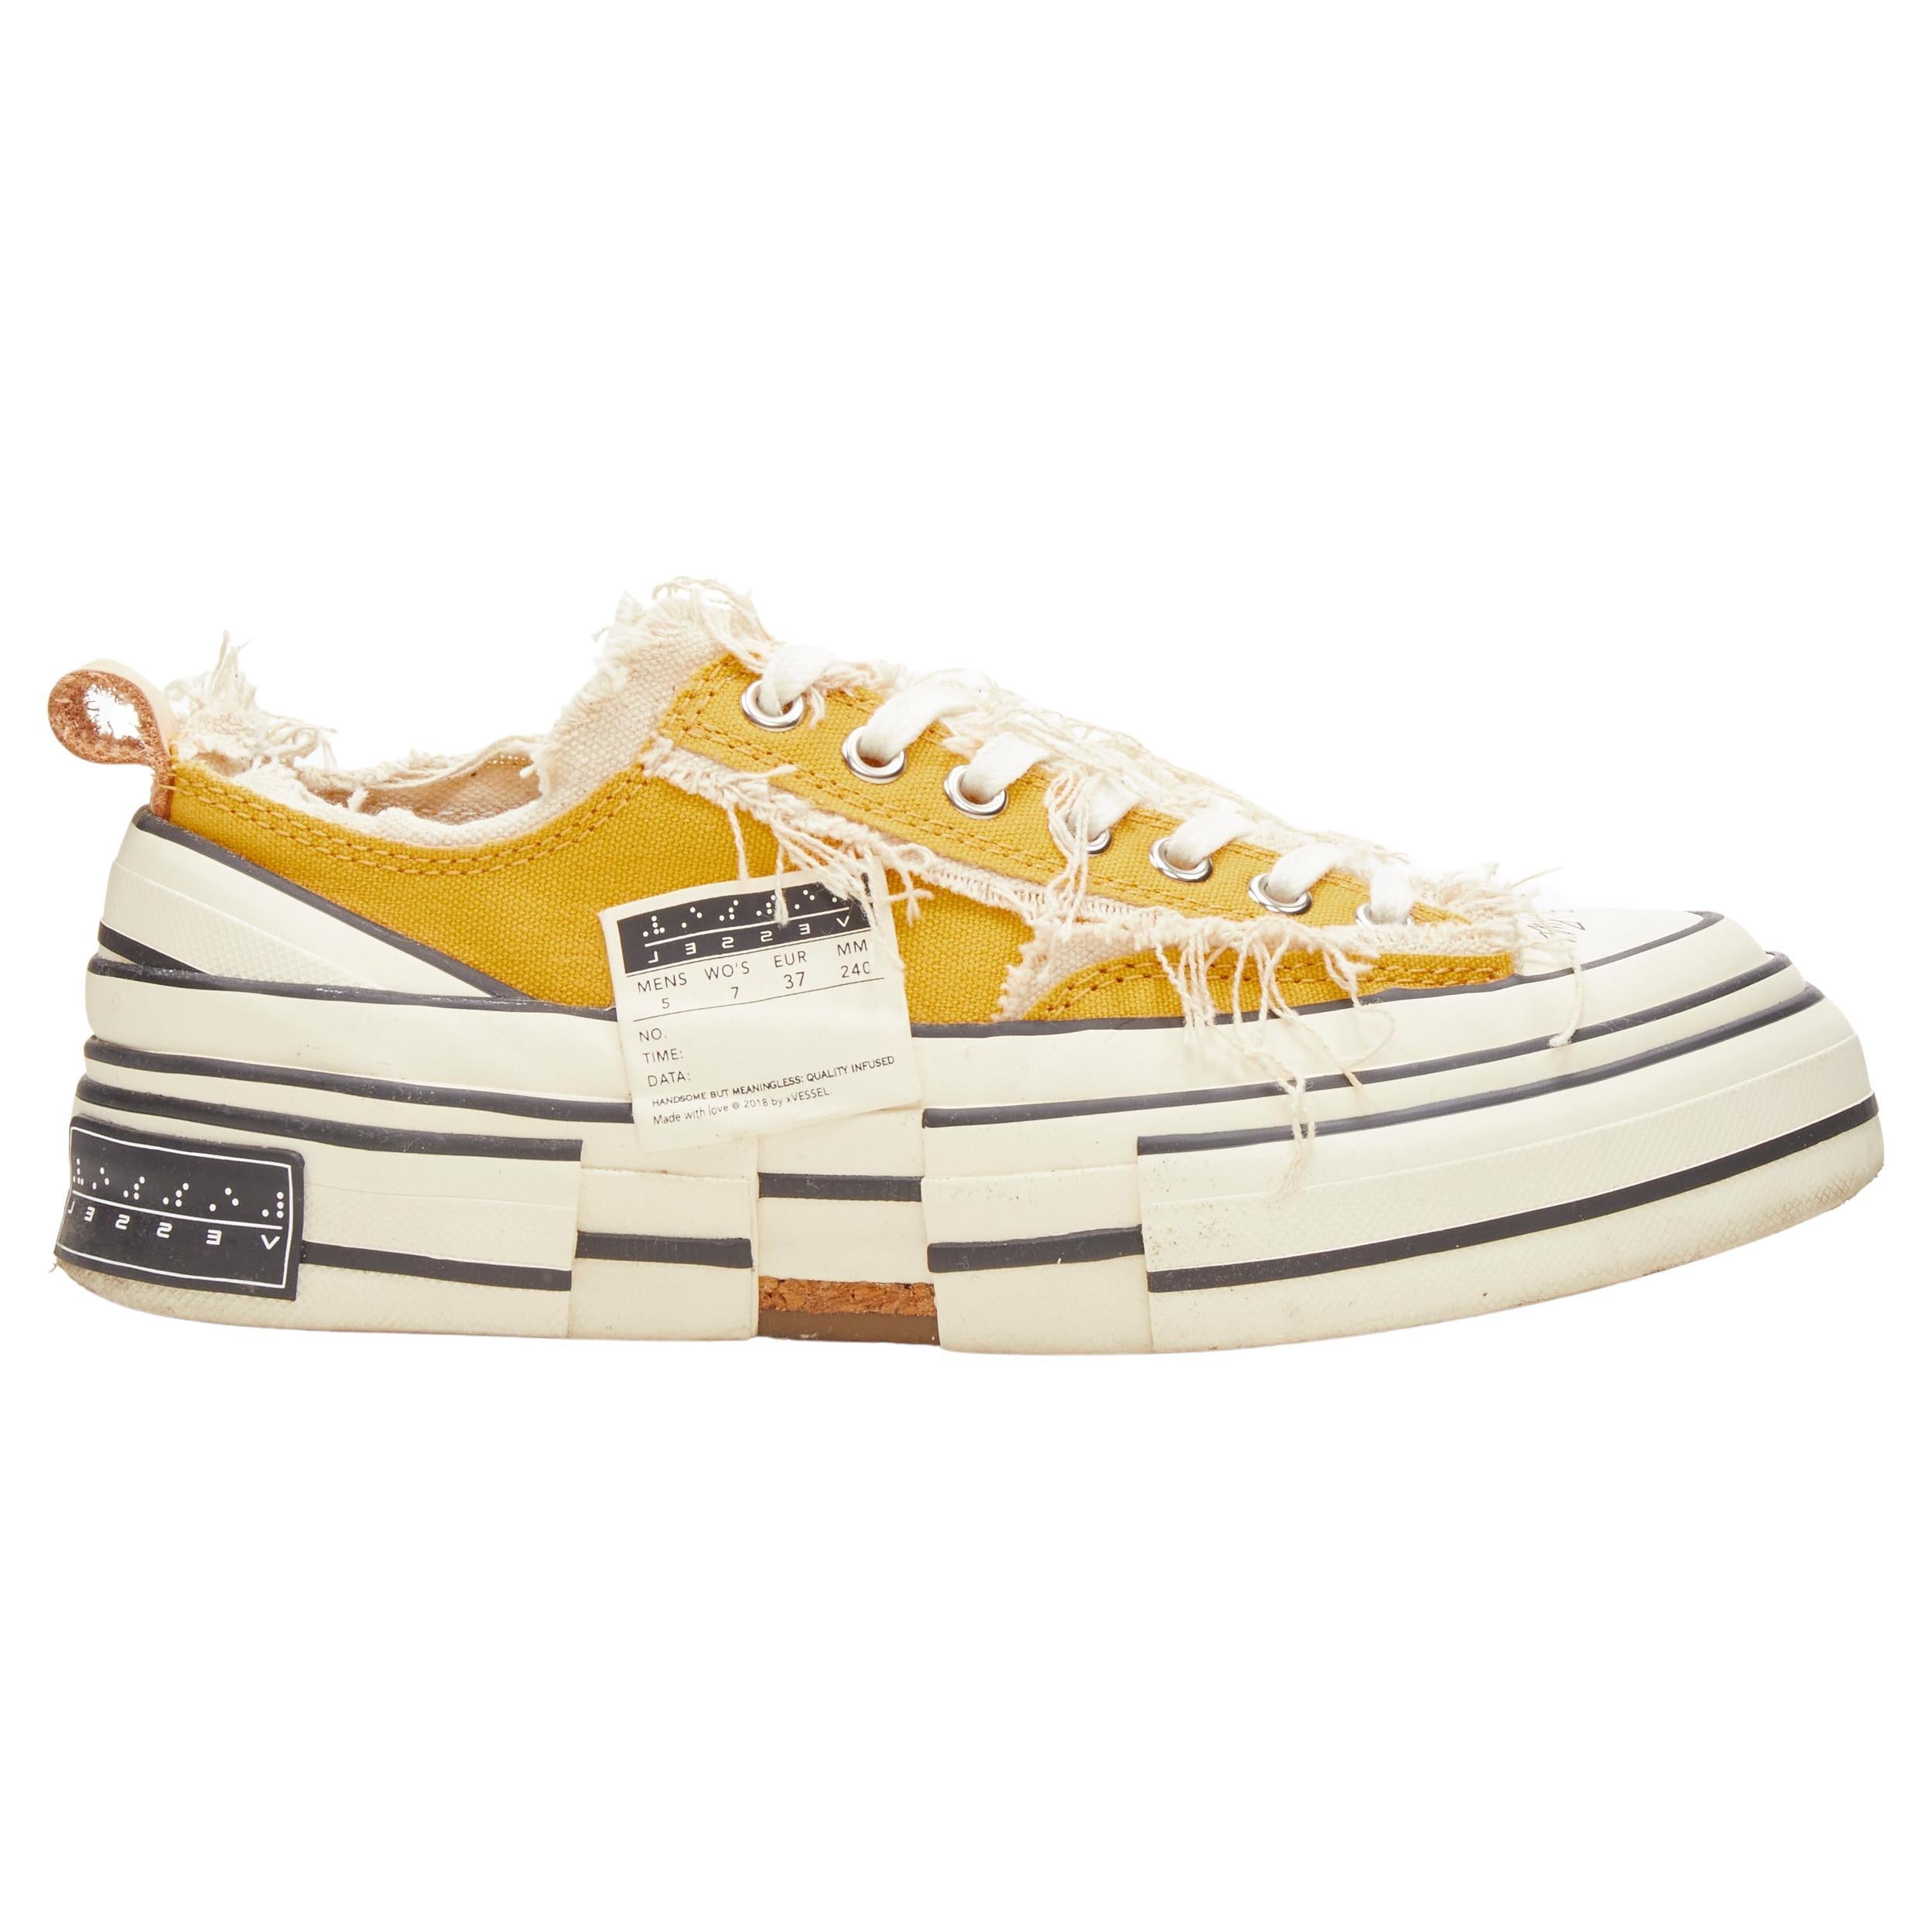 XVESSEL G.O.P. Lows yellow deconstructed distressed sneakers EU37 US7 For Sale